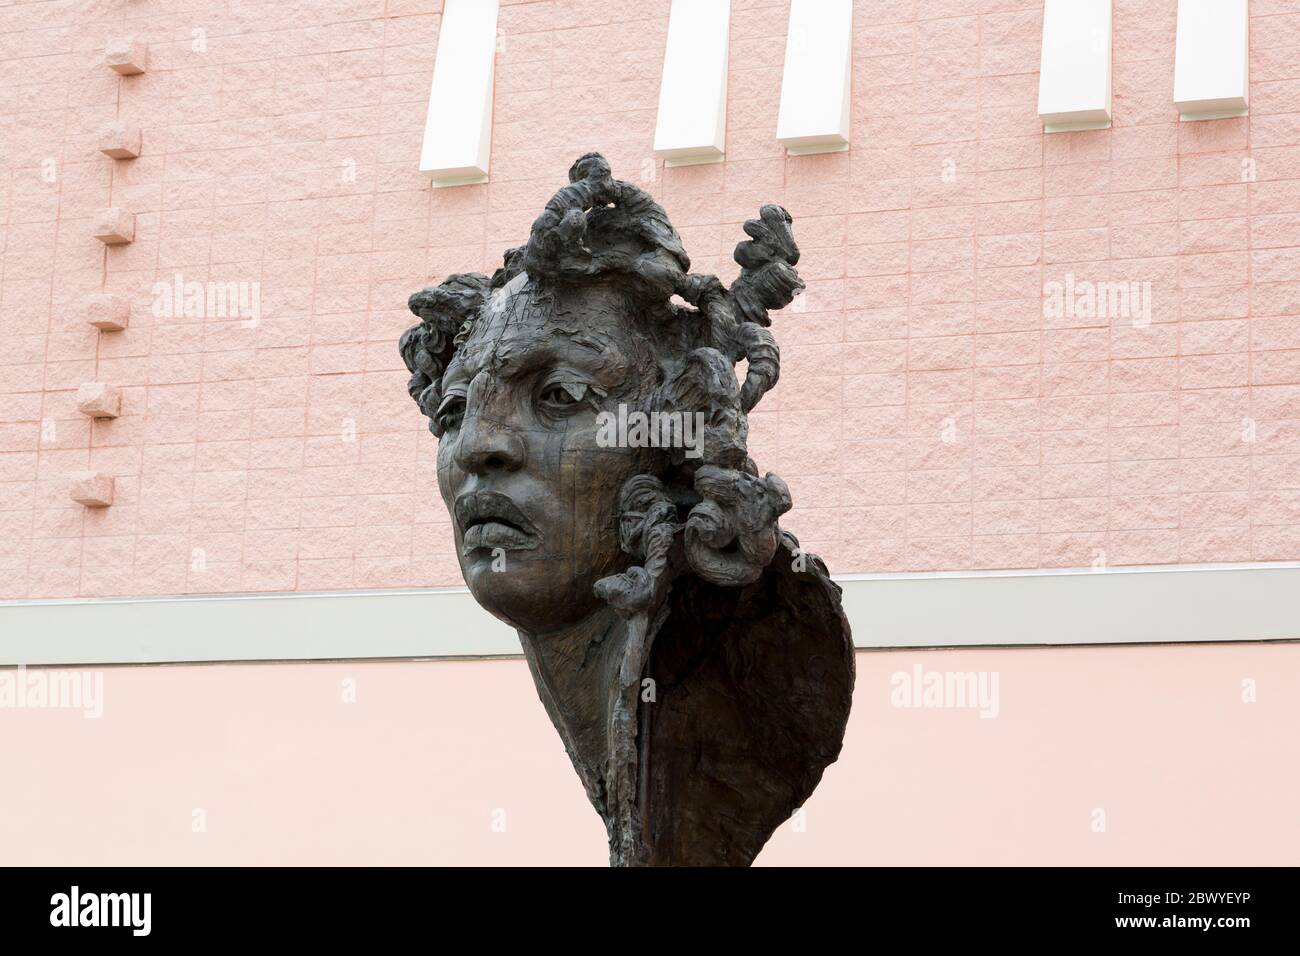 Sculpture outside the Museum of Art,Boca Raton,Florida,United States,North America Stock Photo